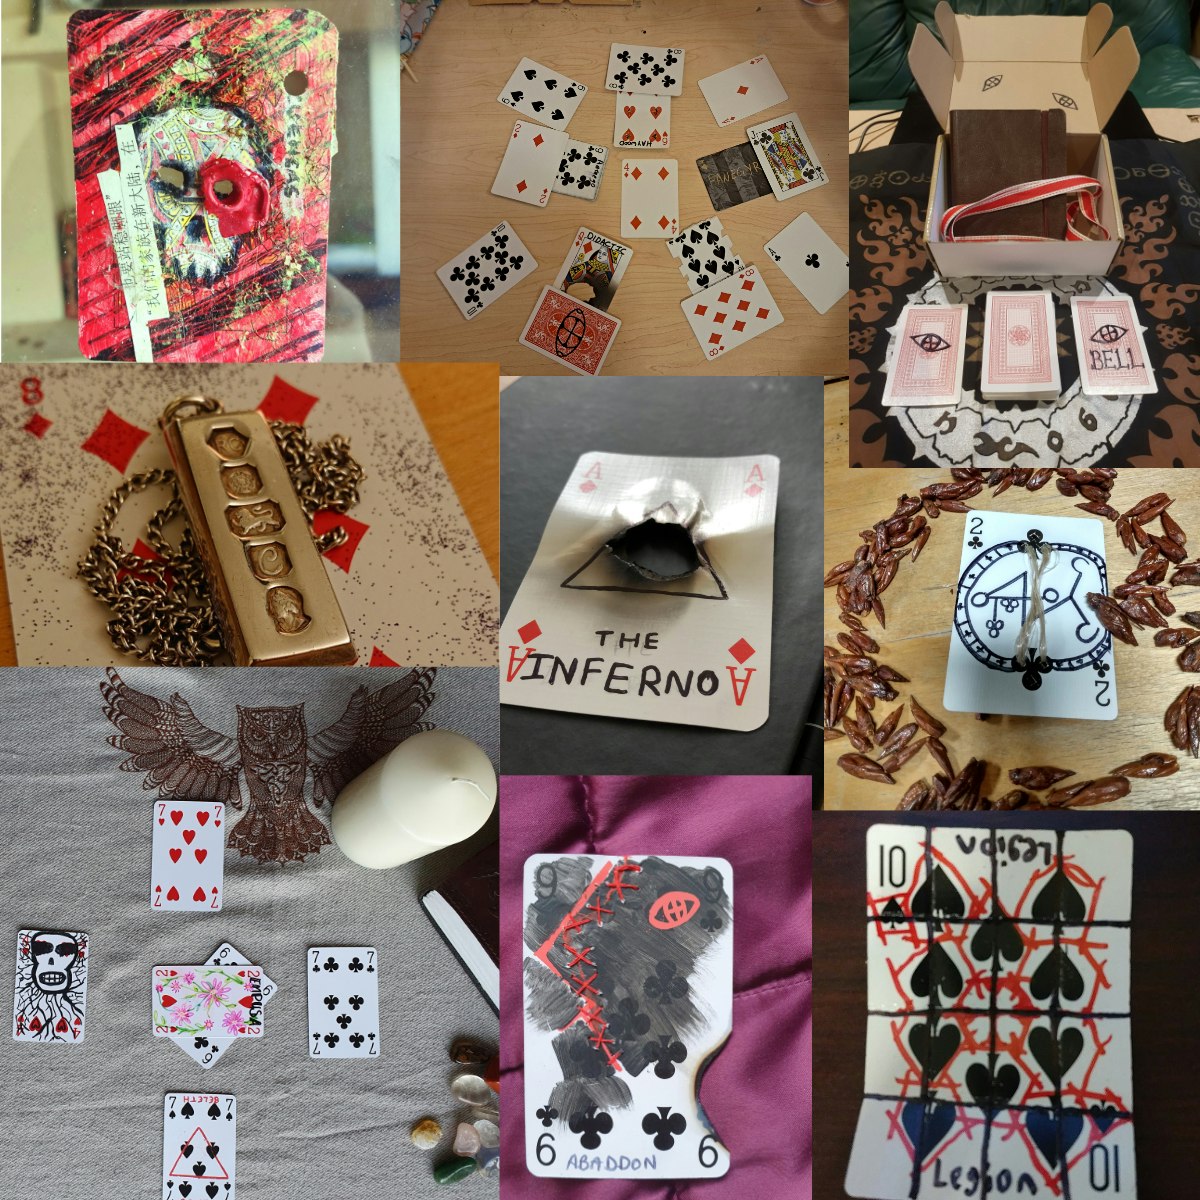 A collage of wrecked cards, with a mix of simple sharpie scrawlings and highly detailed art projects"